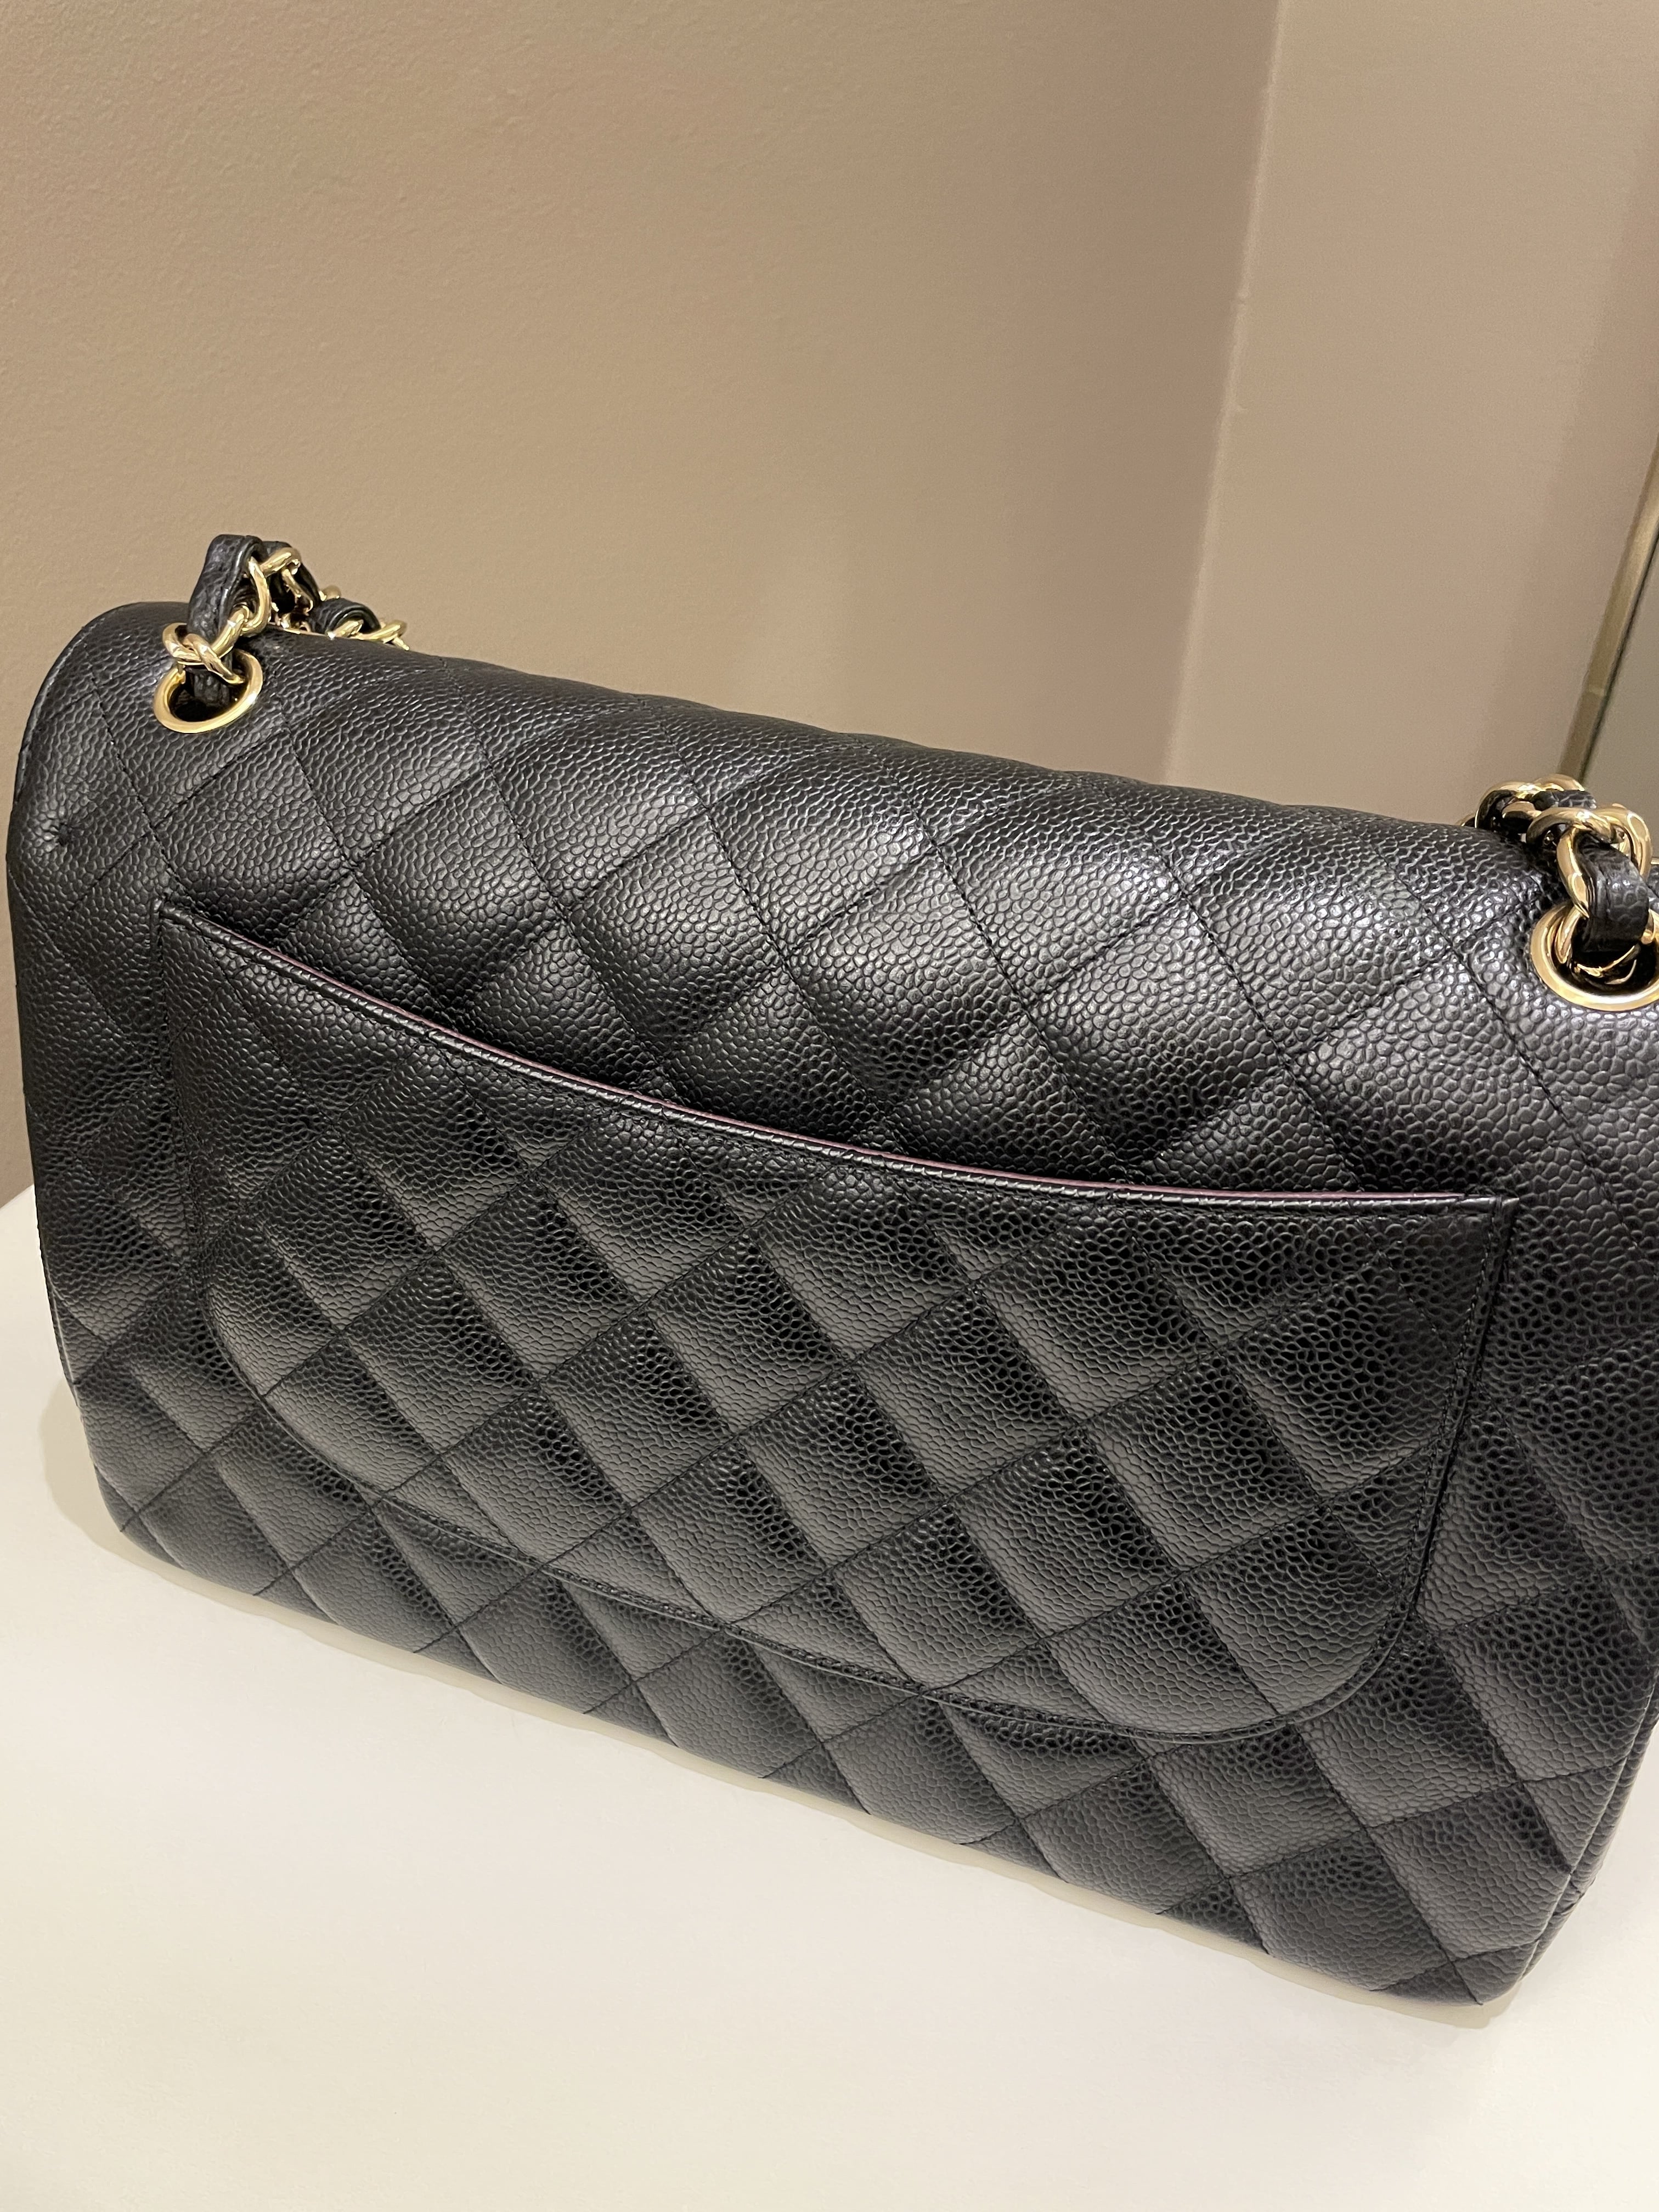 Chanel Classic Quilted Jumbo Double Flap
Black Caviar